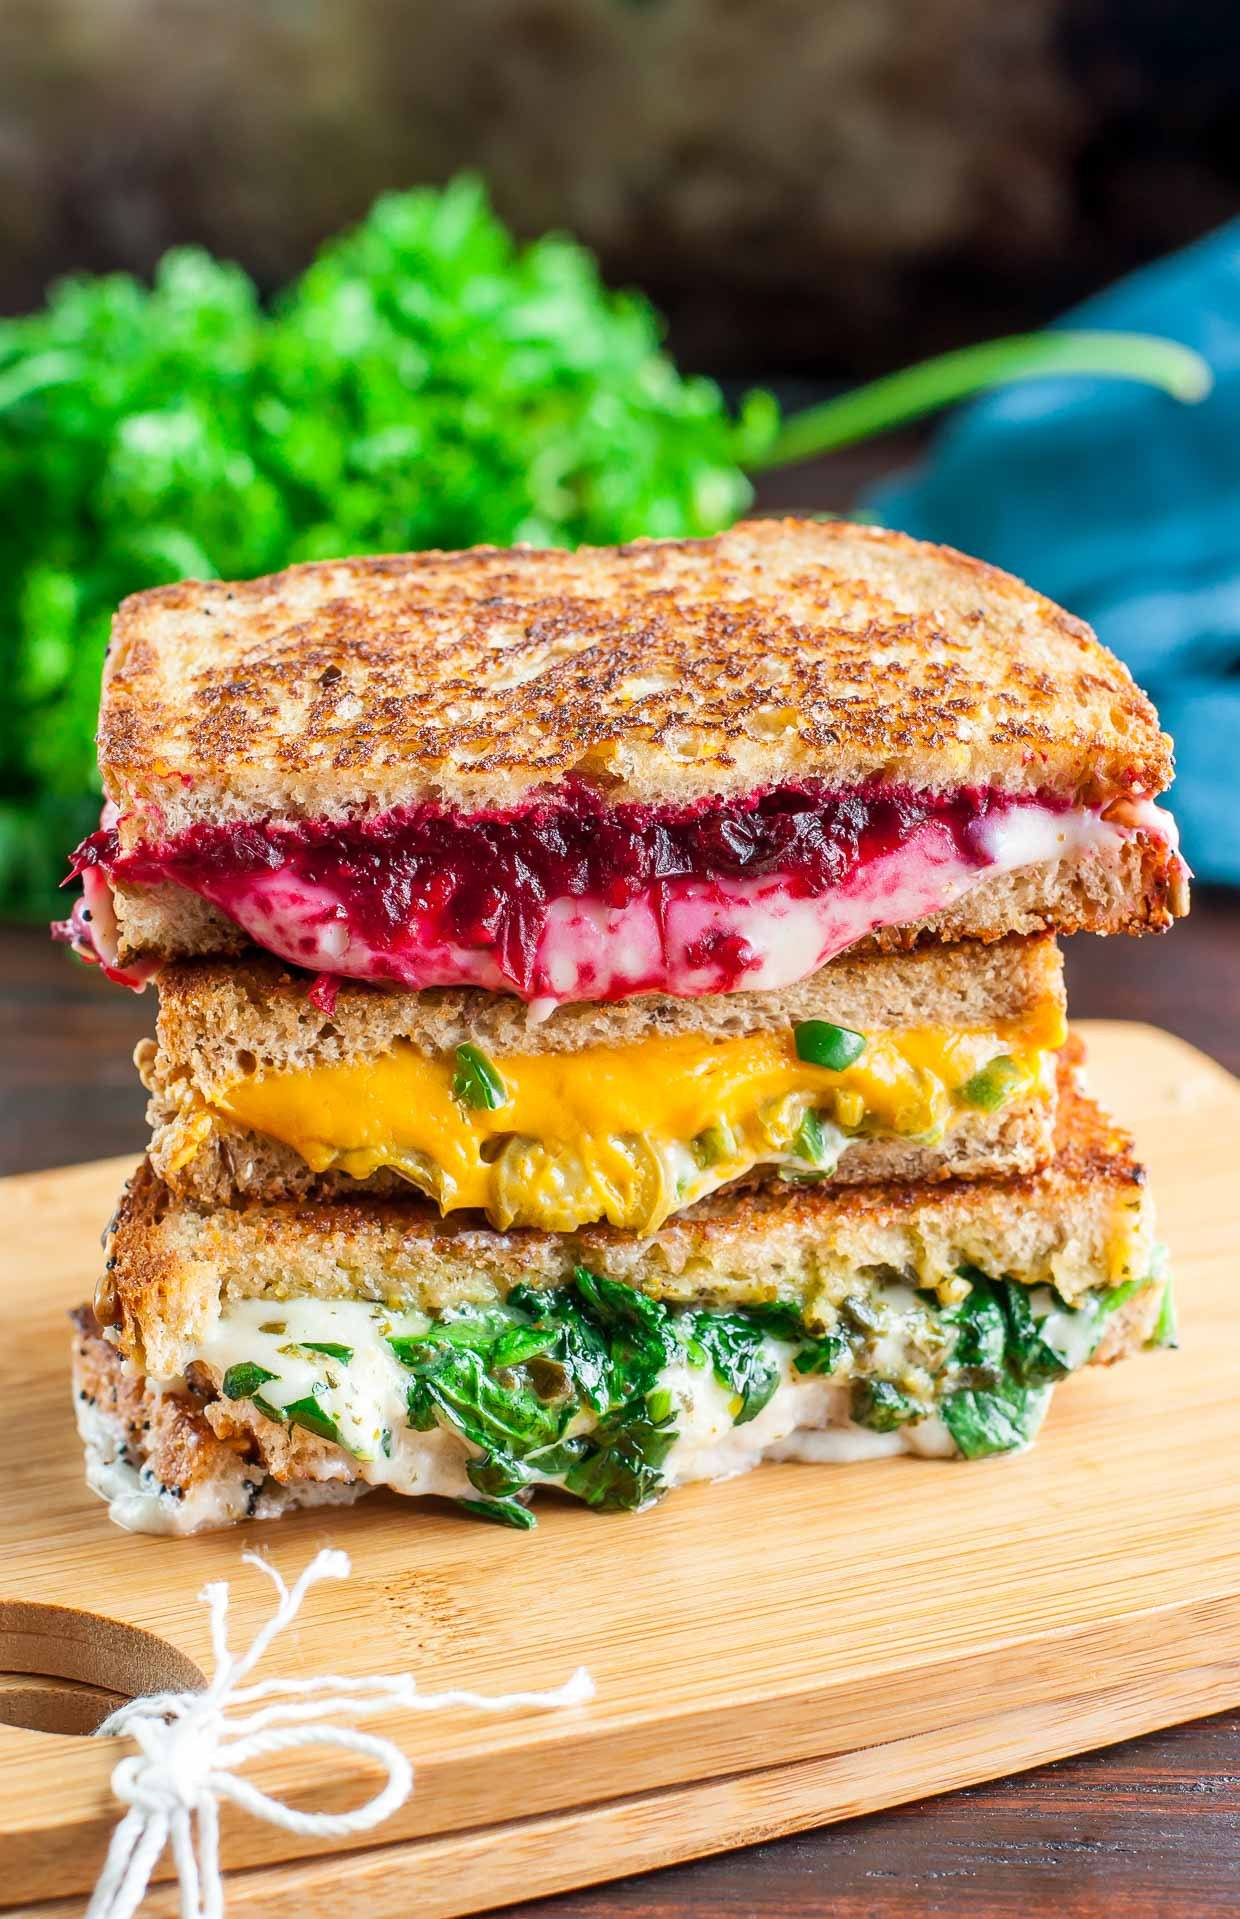 Vegan Jalapeno Popper Grilled Cheese